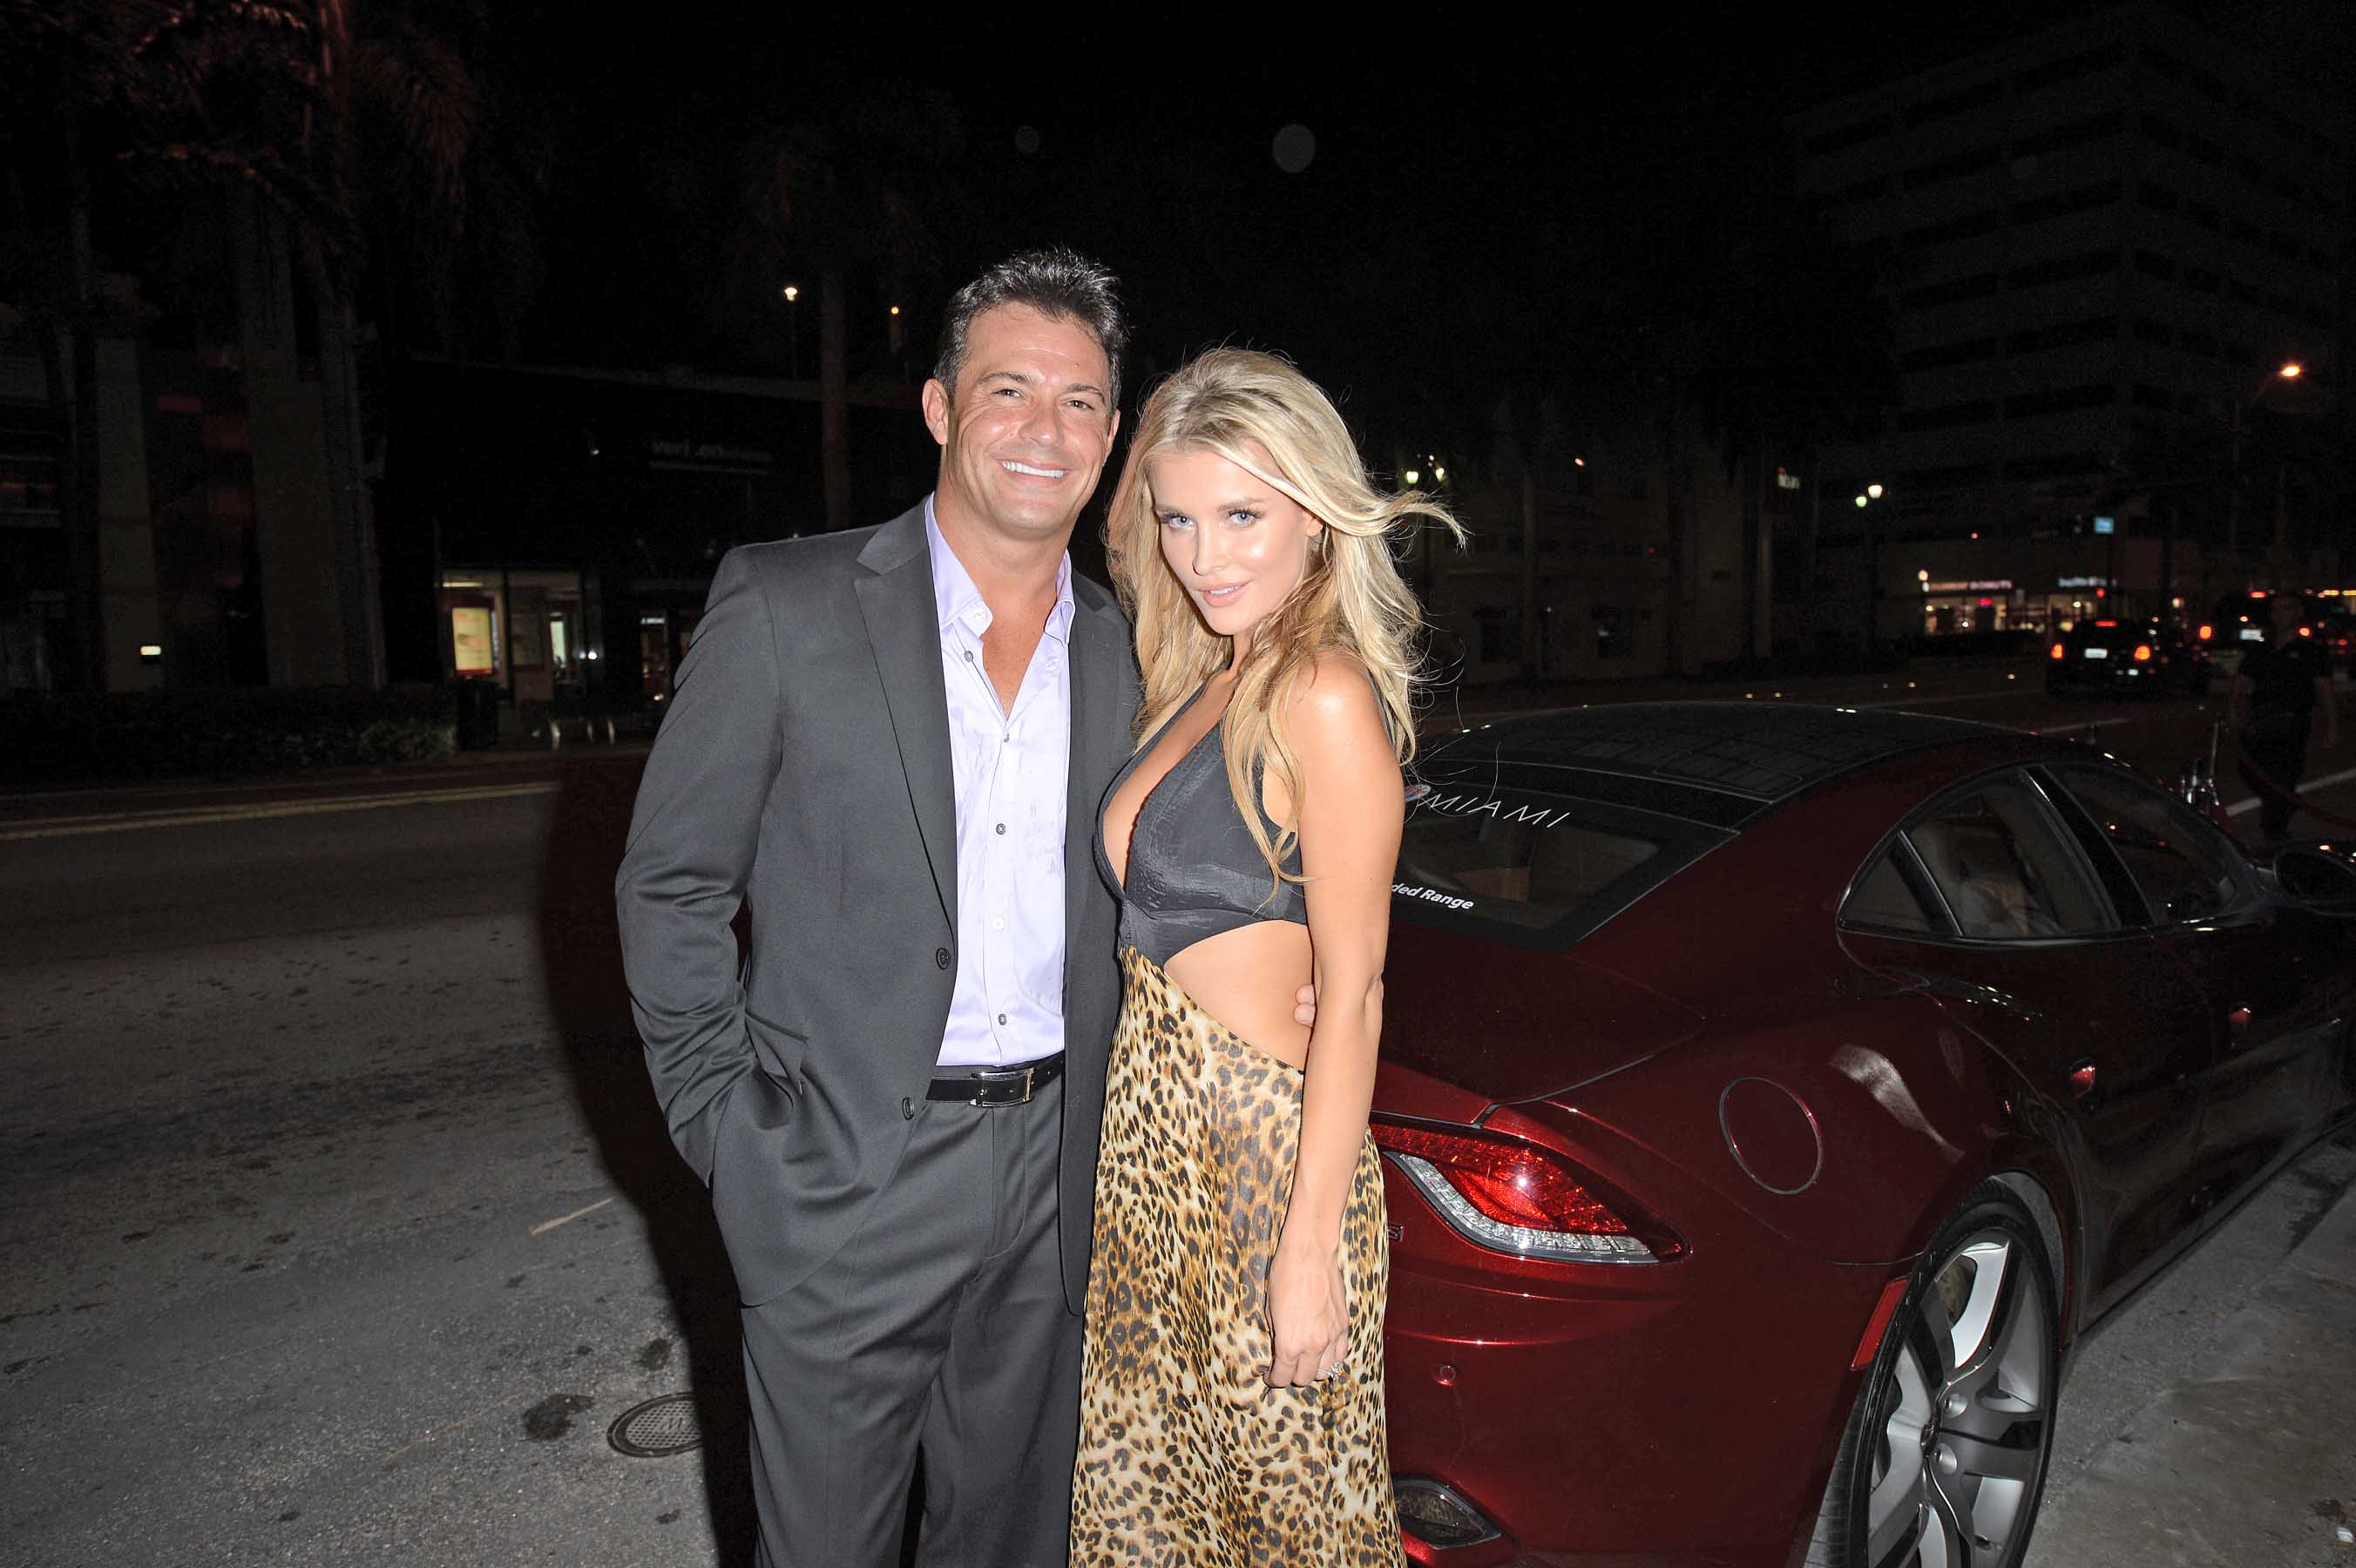 Warren Henry Auto Group Produces The Real Housewives of Miami Season 2 VIP Launch Party